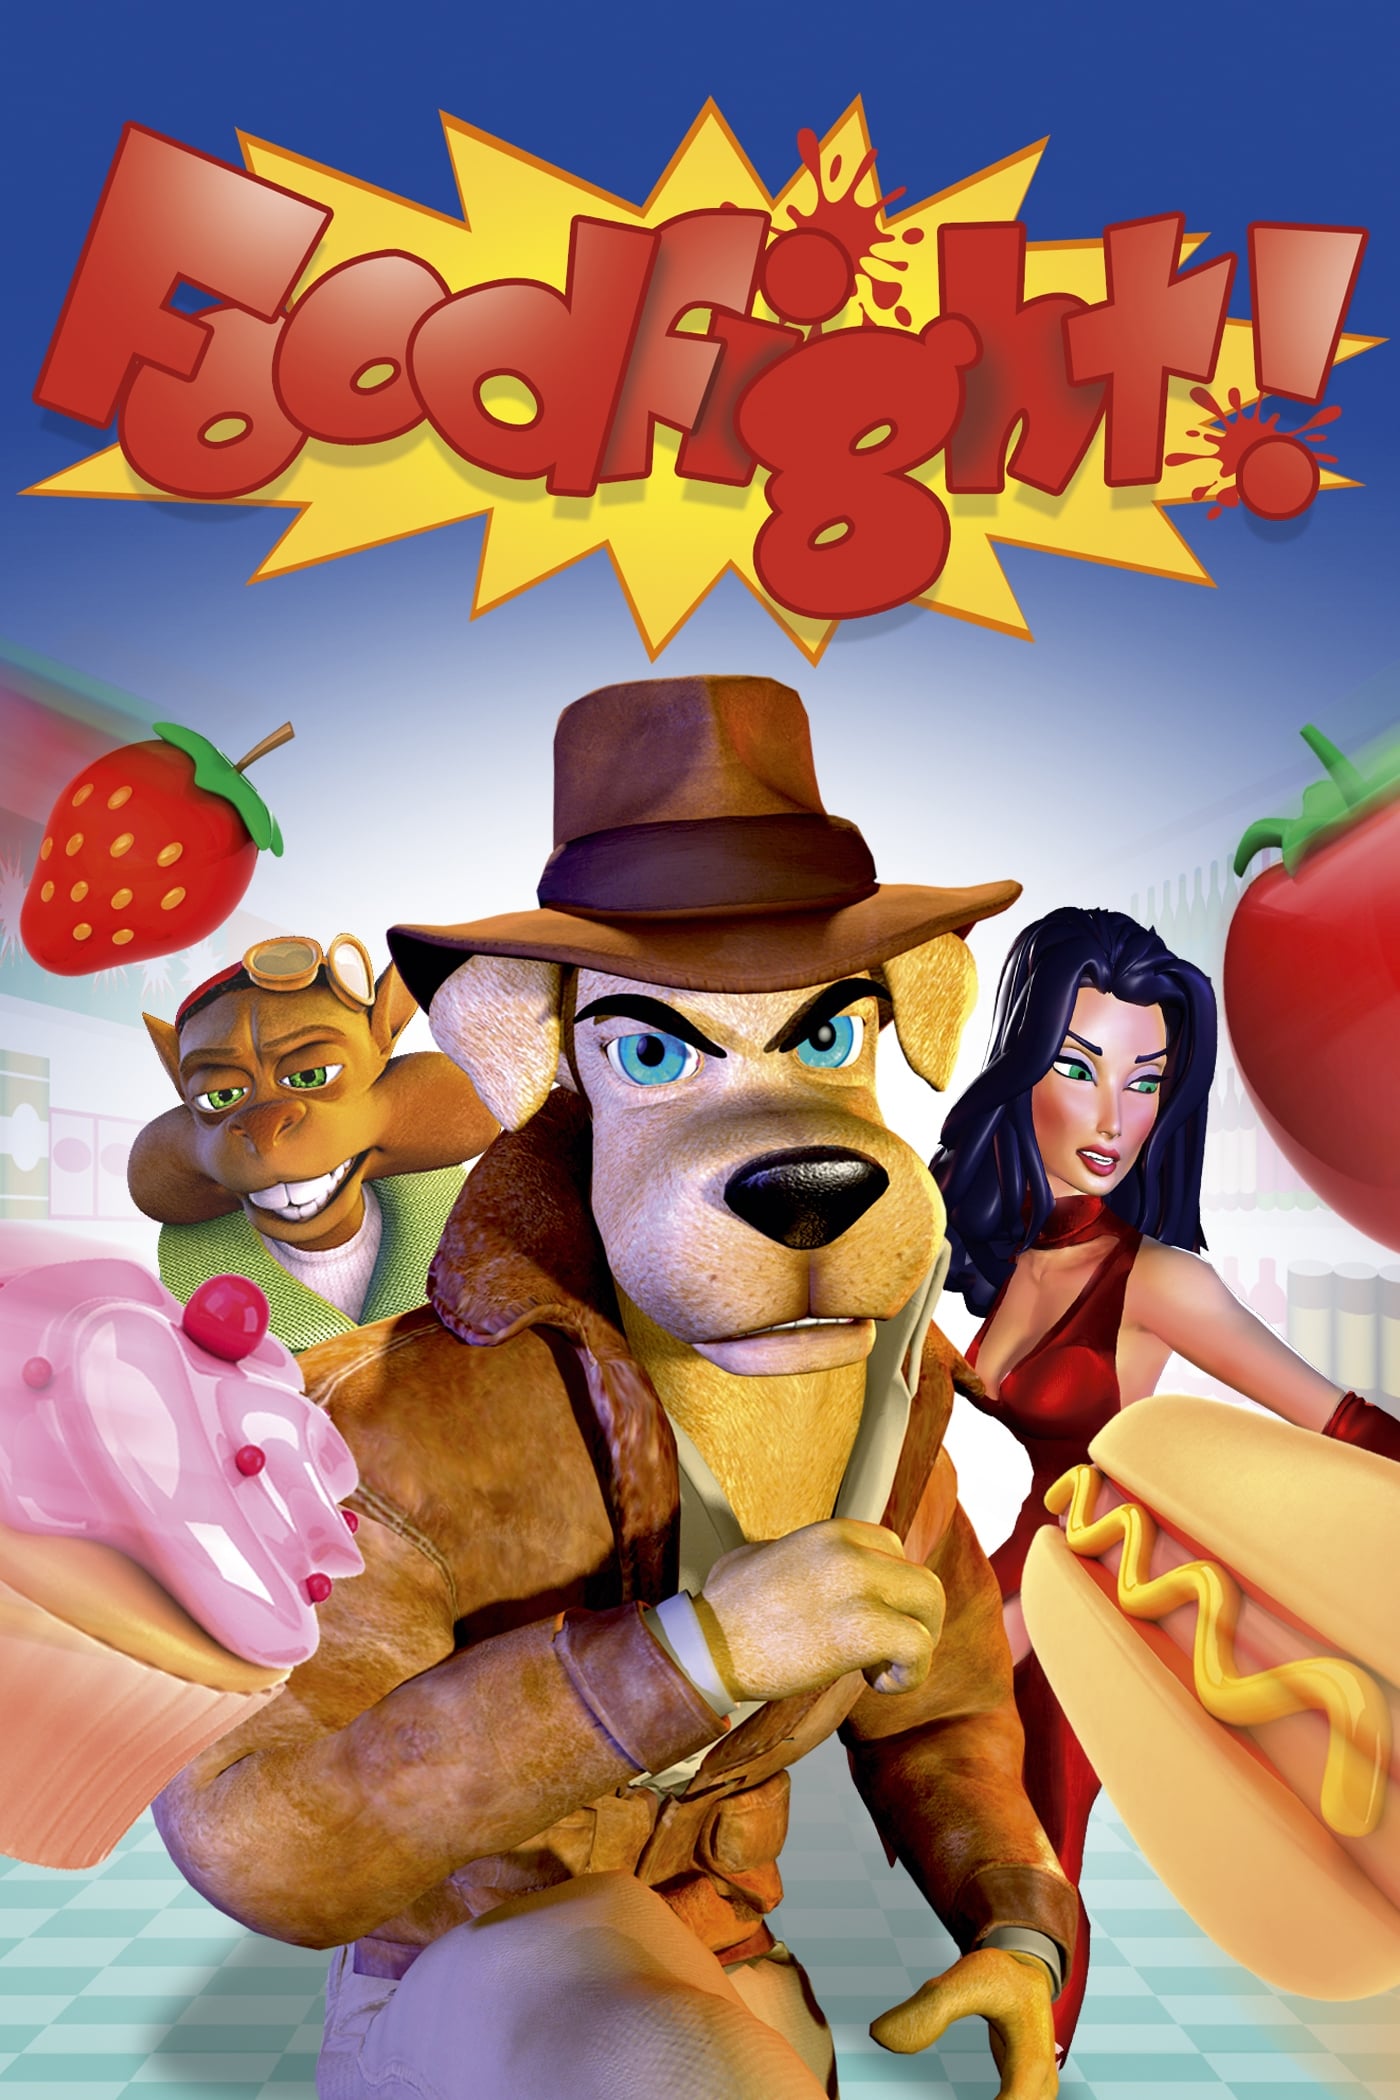 Foodfight! the Videogame - Foodfight! (lost build of cancelled video game based on CGI animated film; 2006-2007)